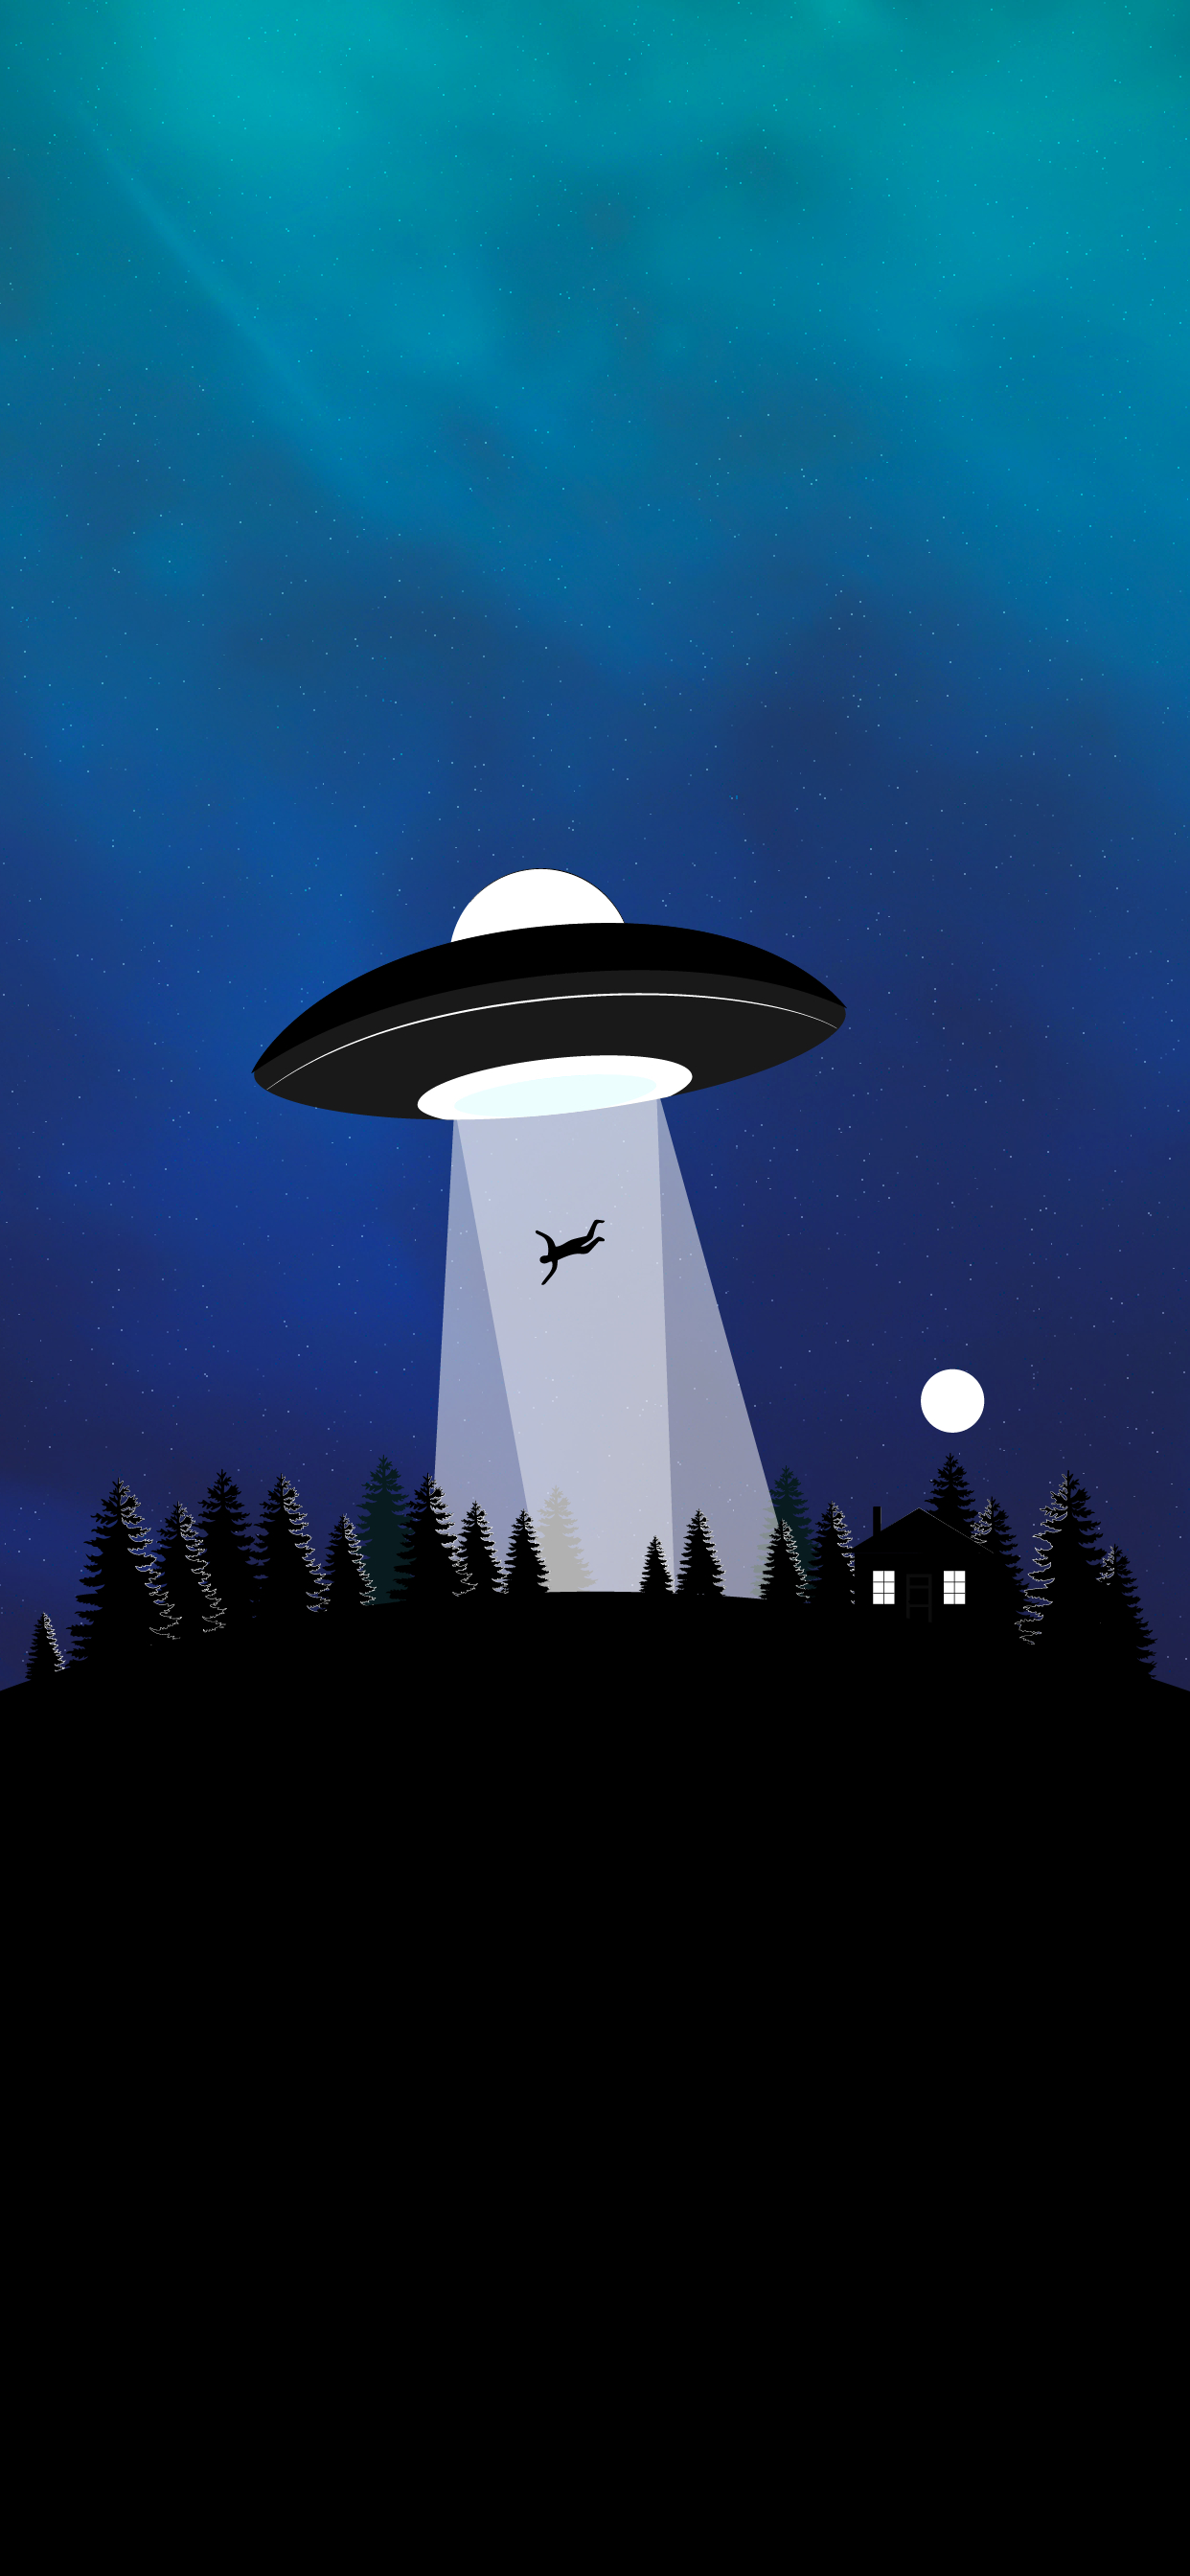 1242x2688 Ufo abduction wallpaper for phone